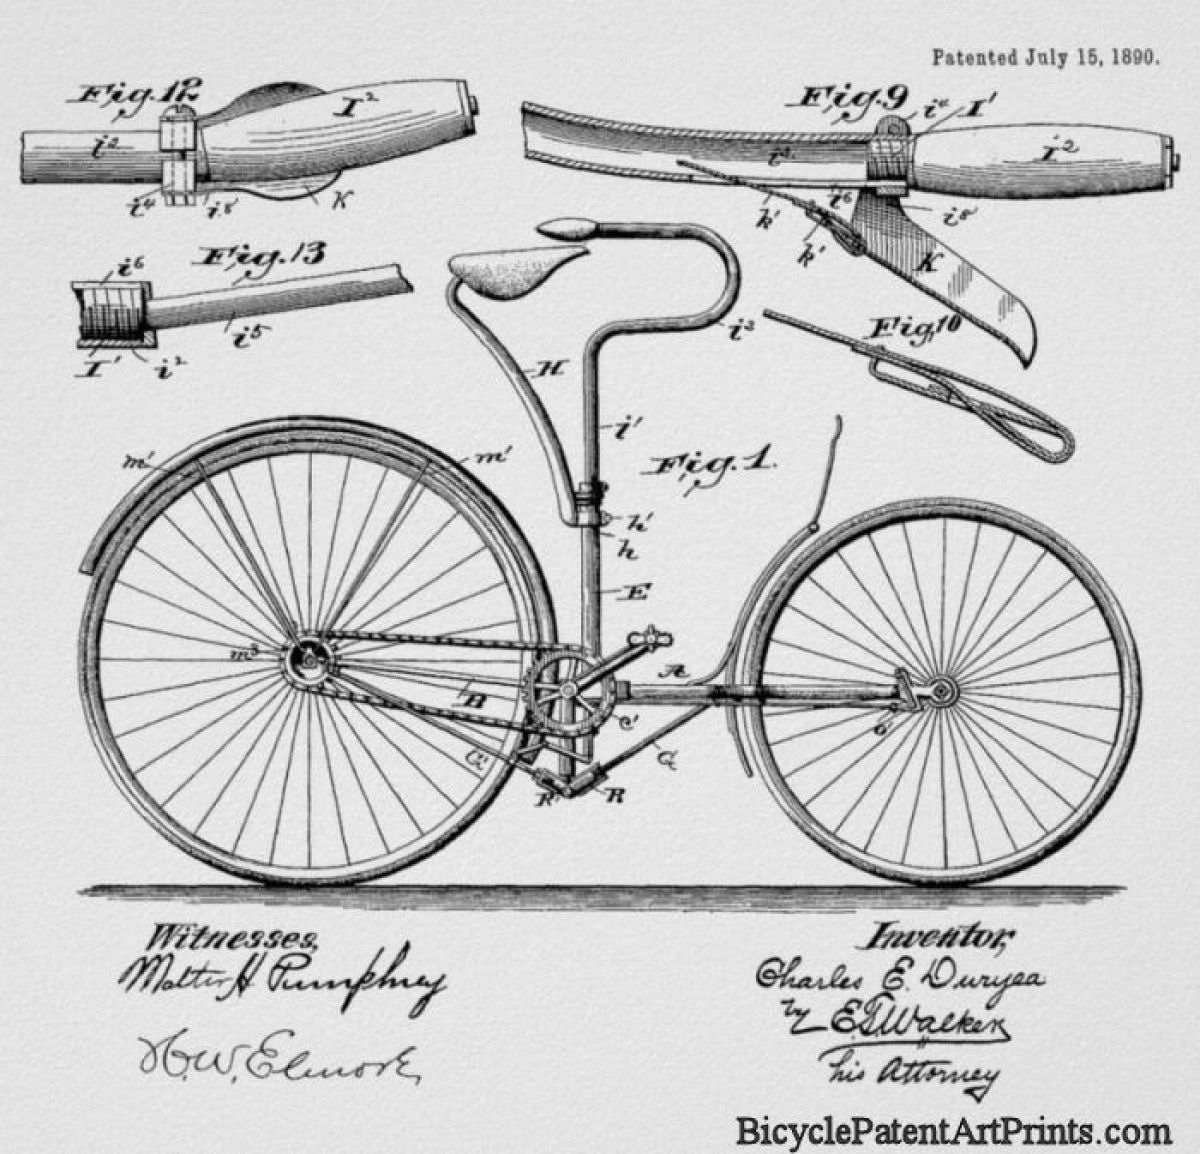 1890 Chain driven bike with close up on the handlebars and brake mechanism